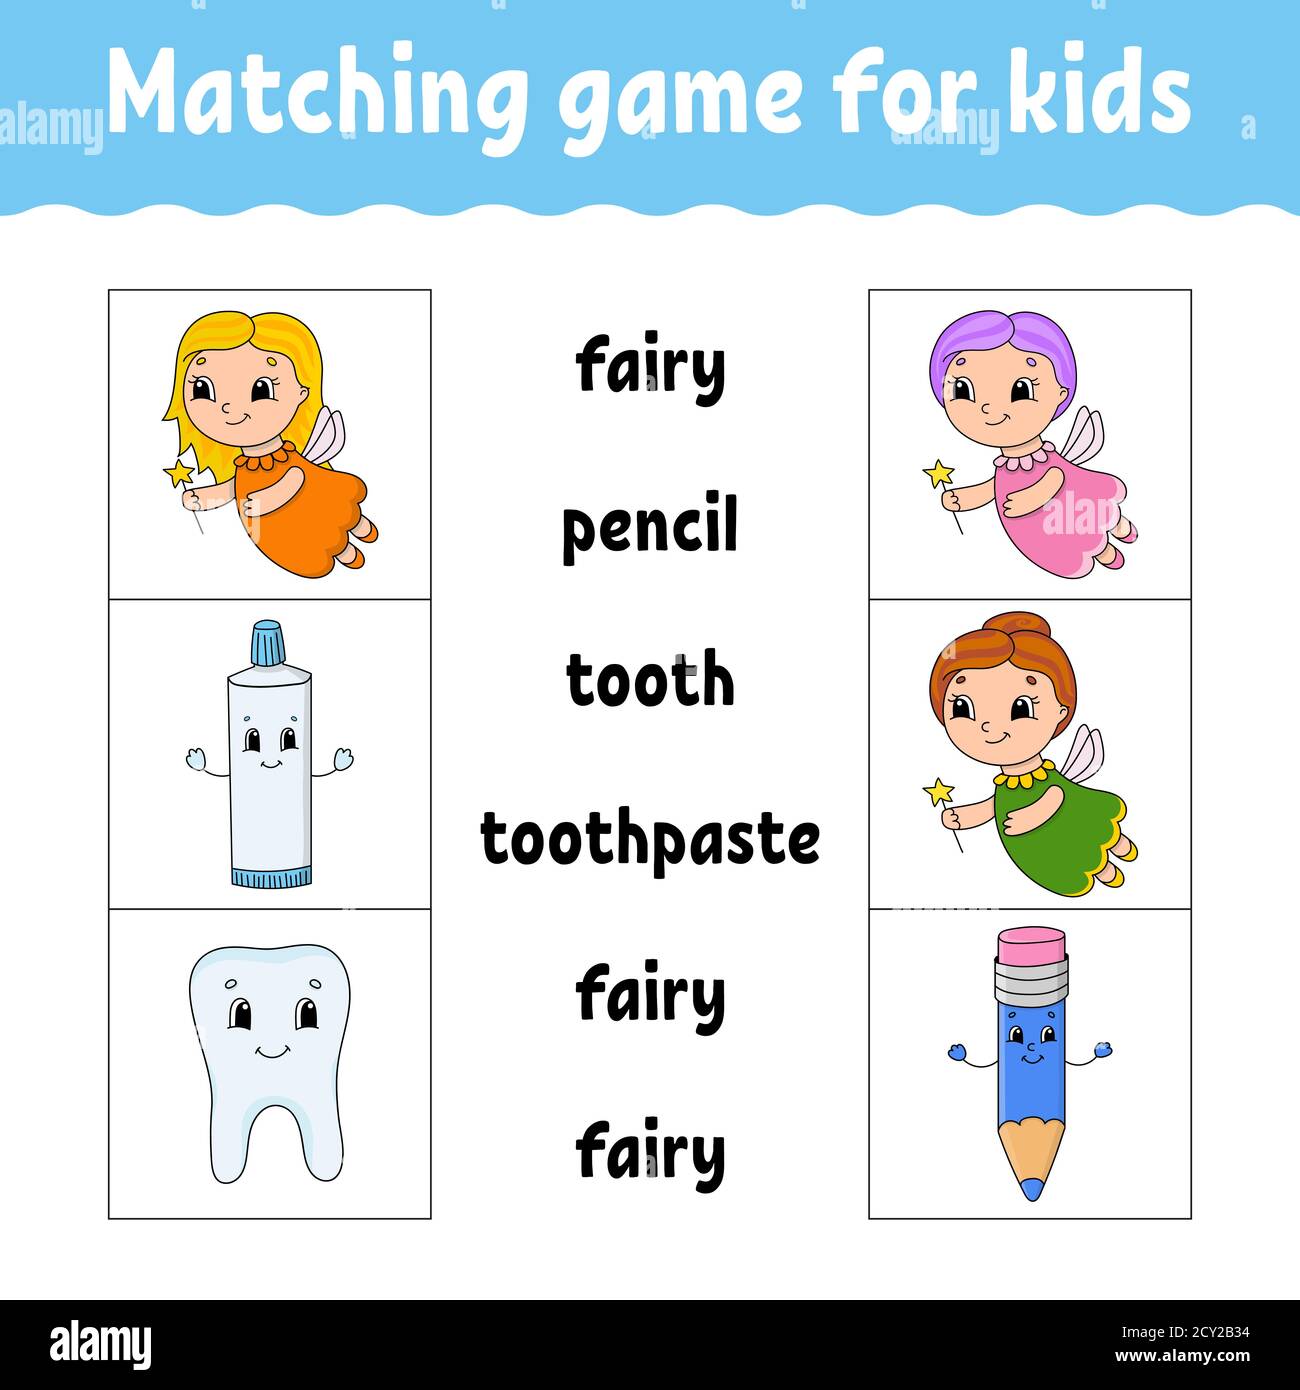 Matching game for kids. Find the correct answer. Draw a line. Learning words. Activity worksheet. Cartoon character. Stock Vector